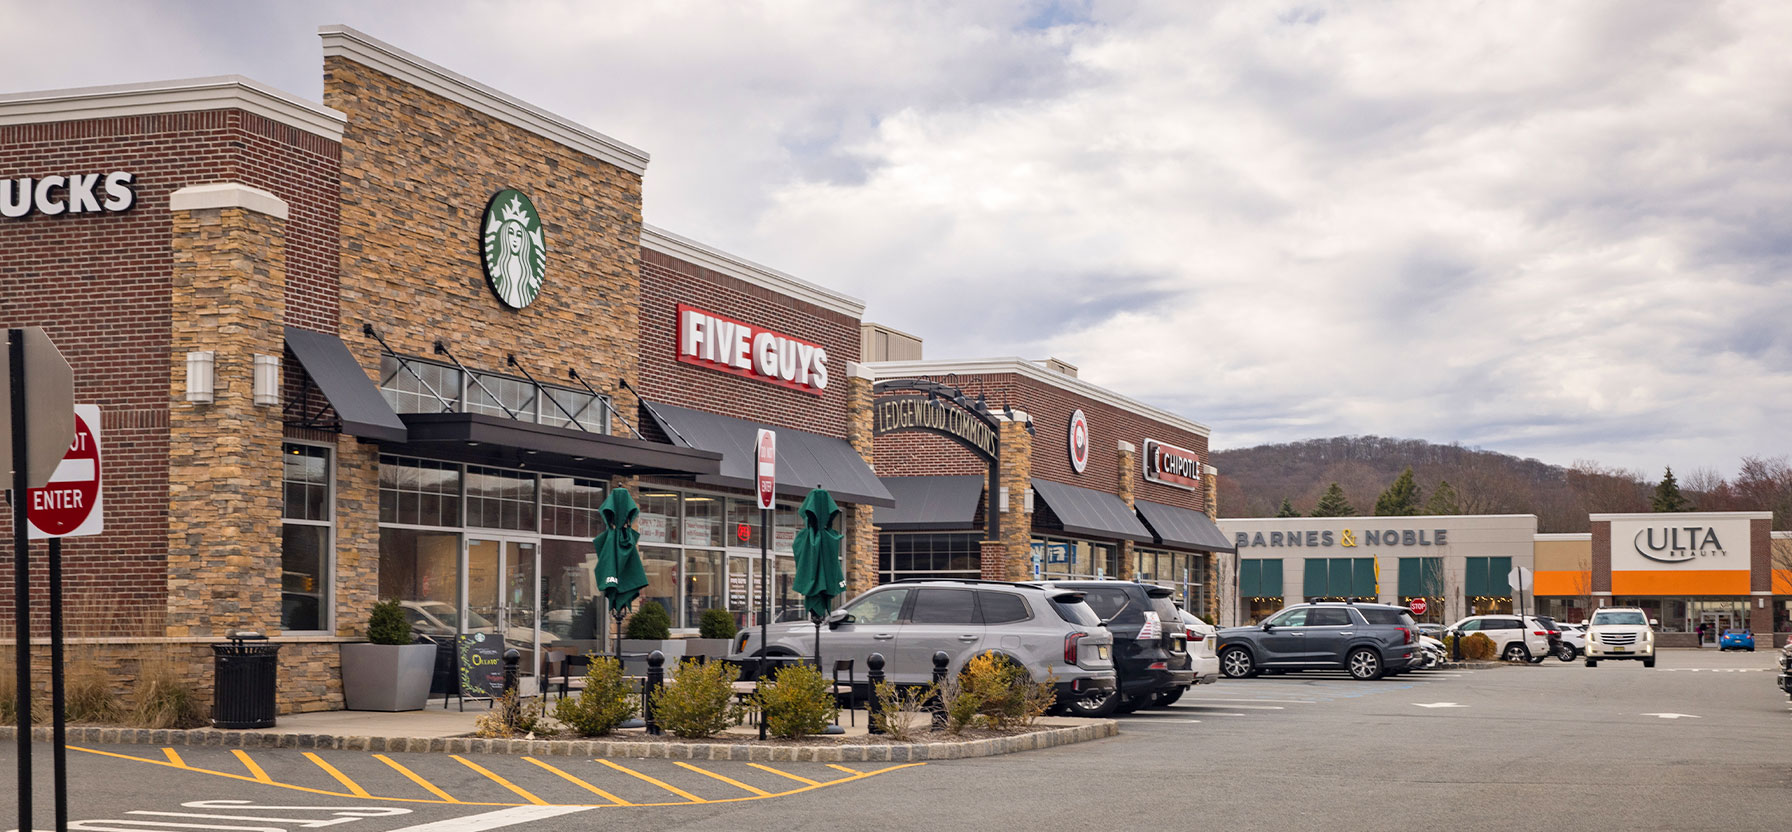 Image of Ledgewood Commons shopping center with various shops and parking spaces.